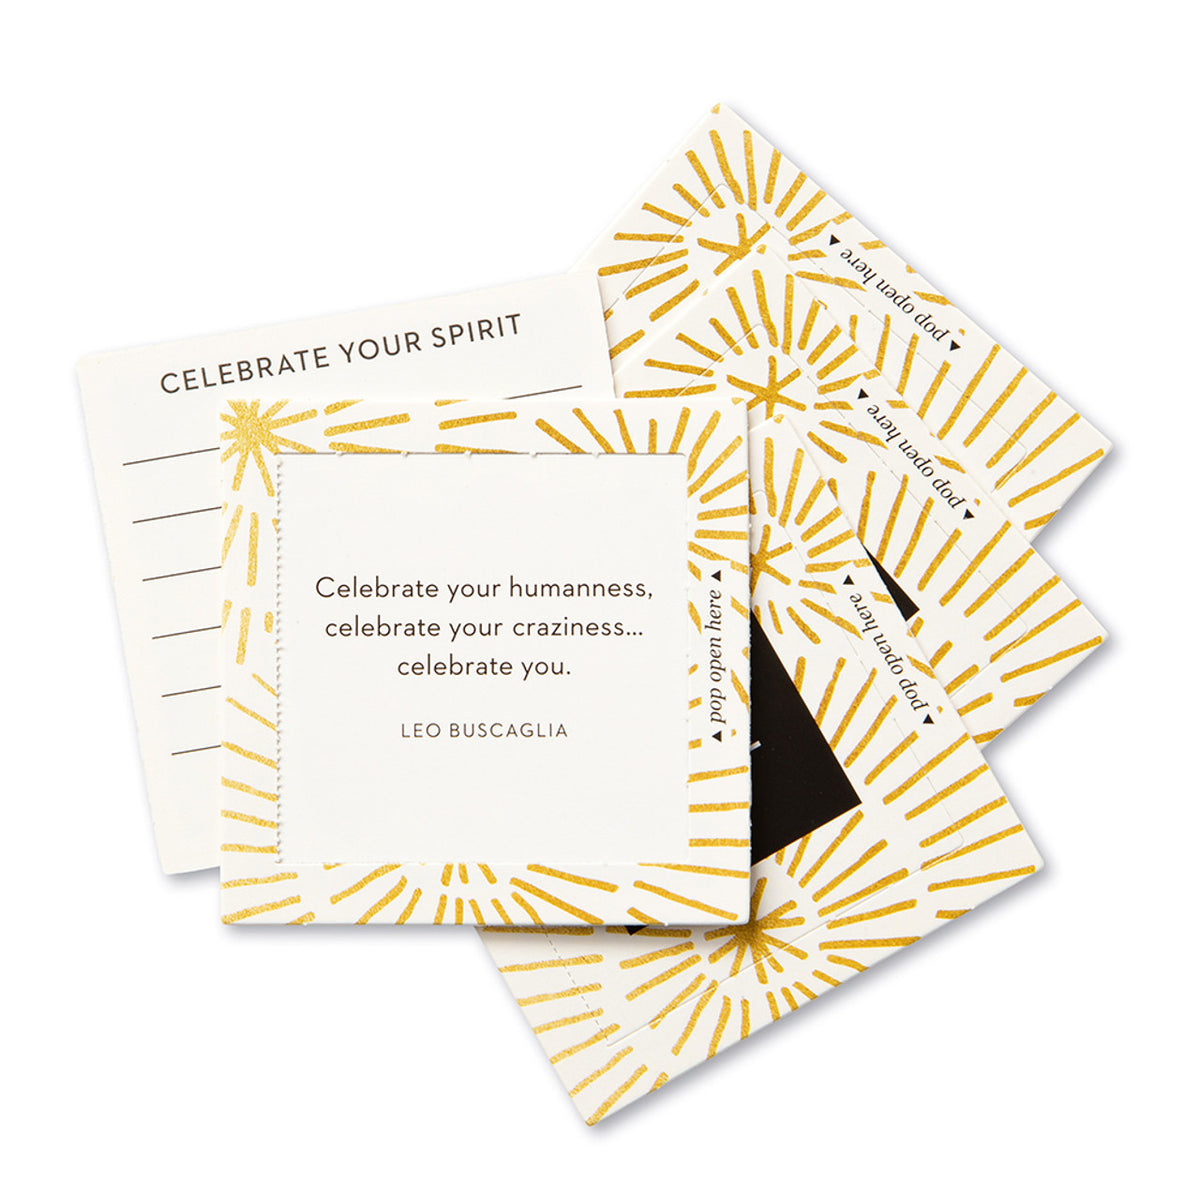 Sample card - "Celebrate your humanness, celebrate your craziness...celebrate you."